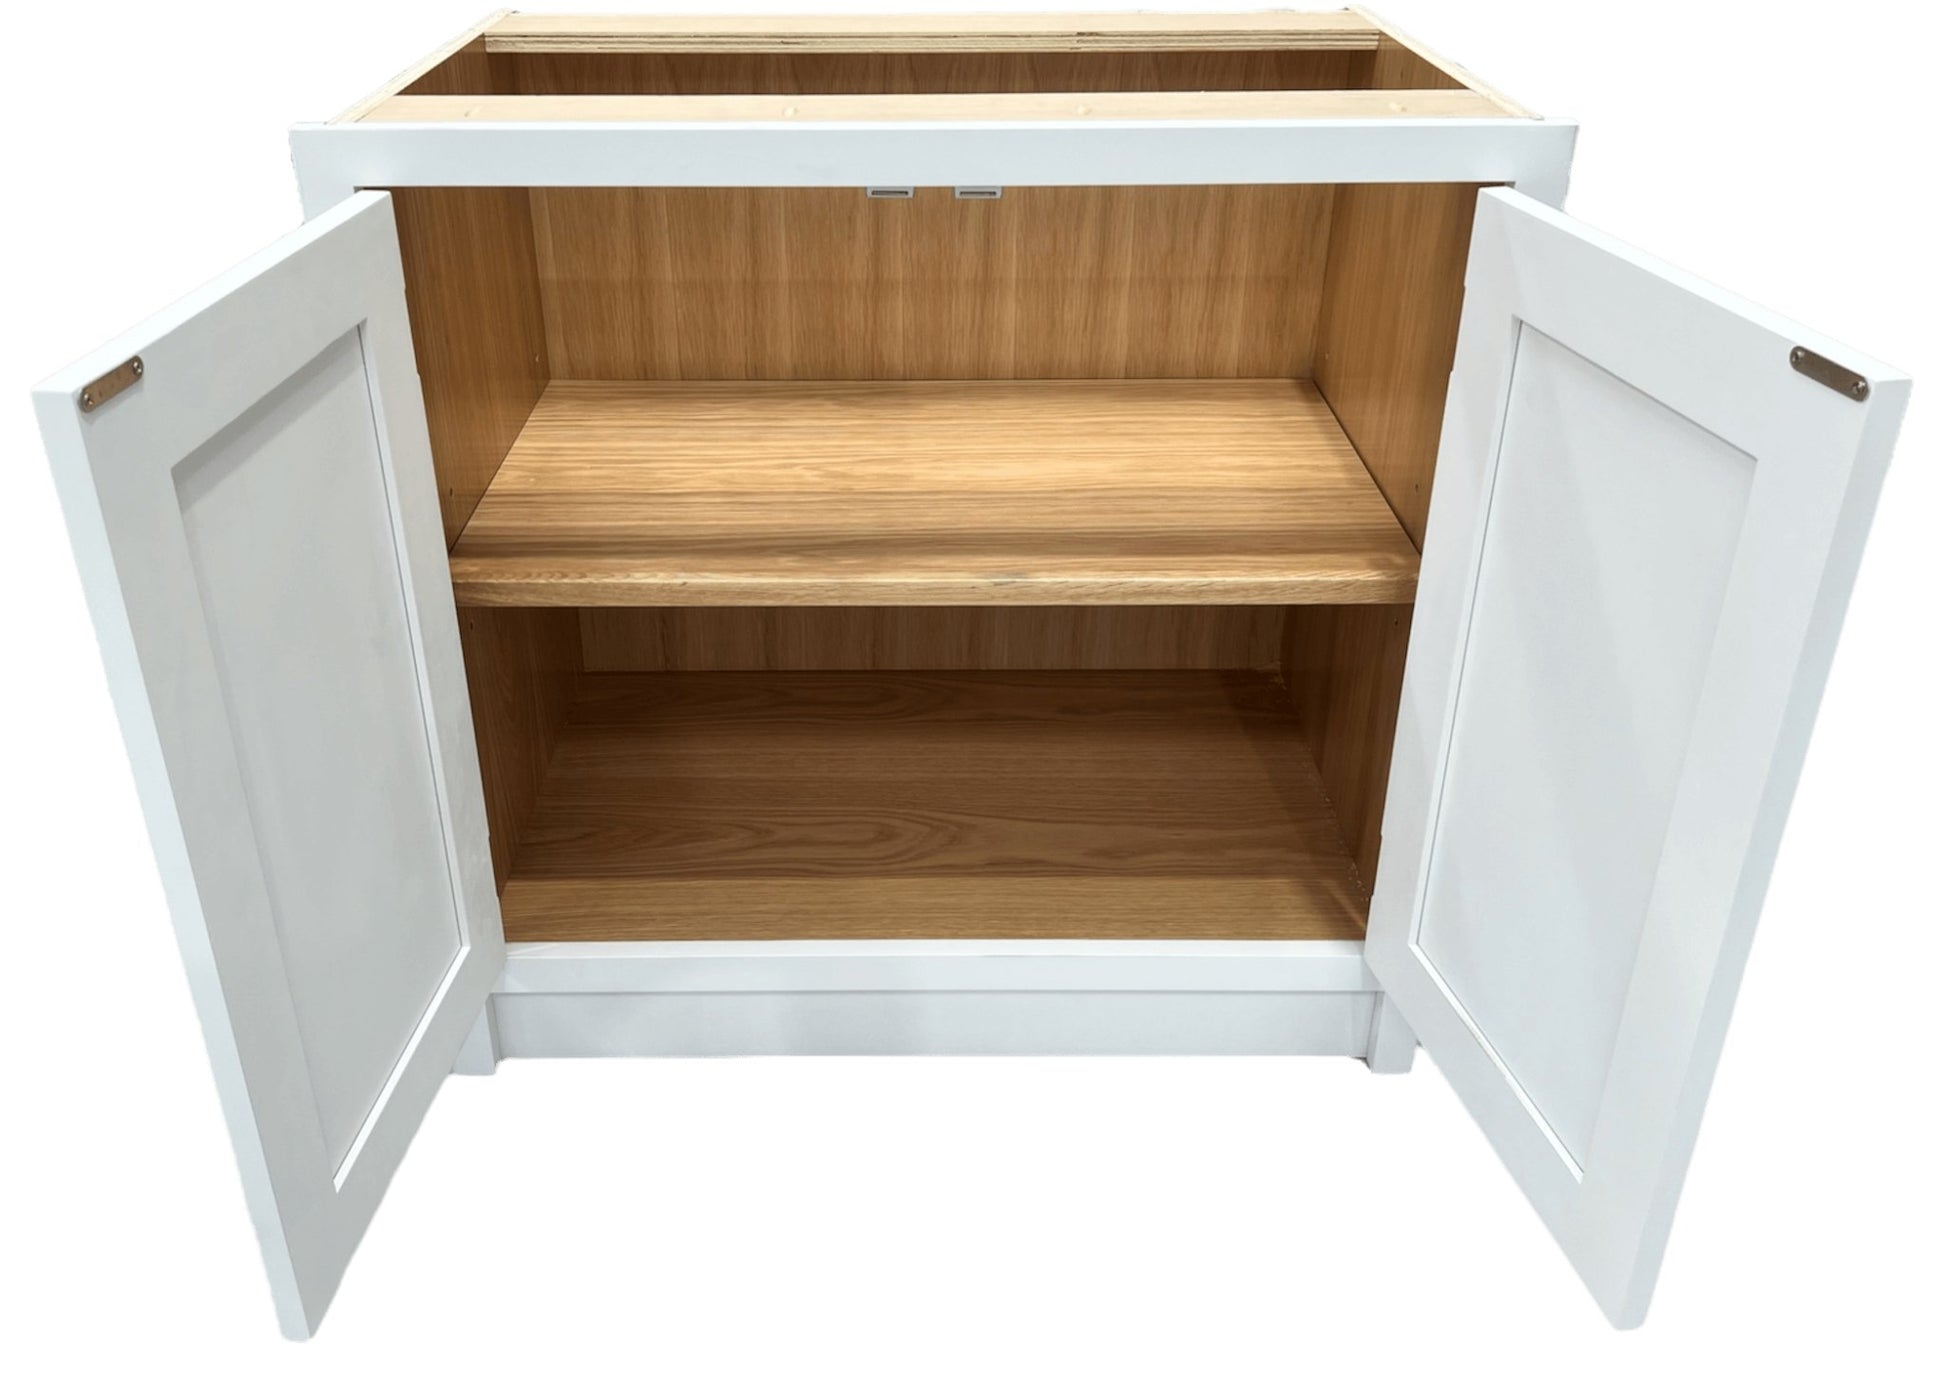 BH2 1000 - 1000mm Highline Double Door Base Unit - Classic Kitchens Direct